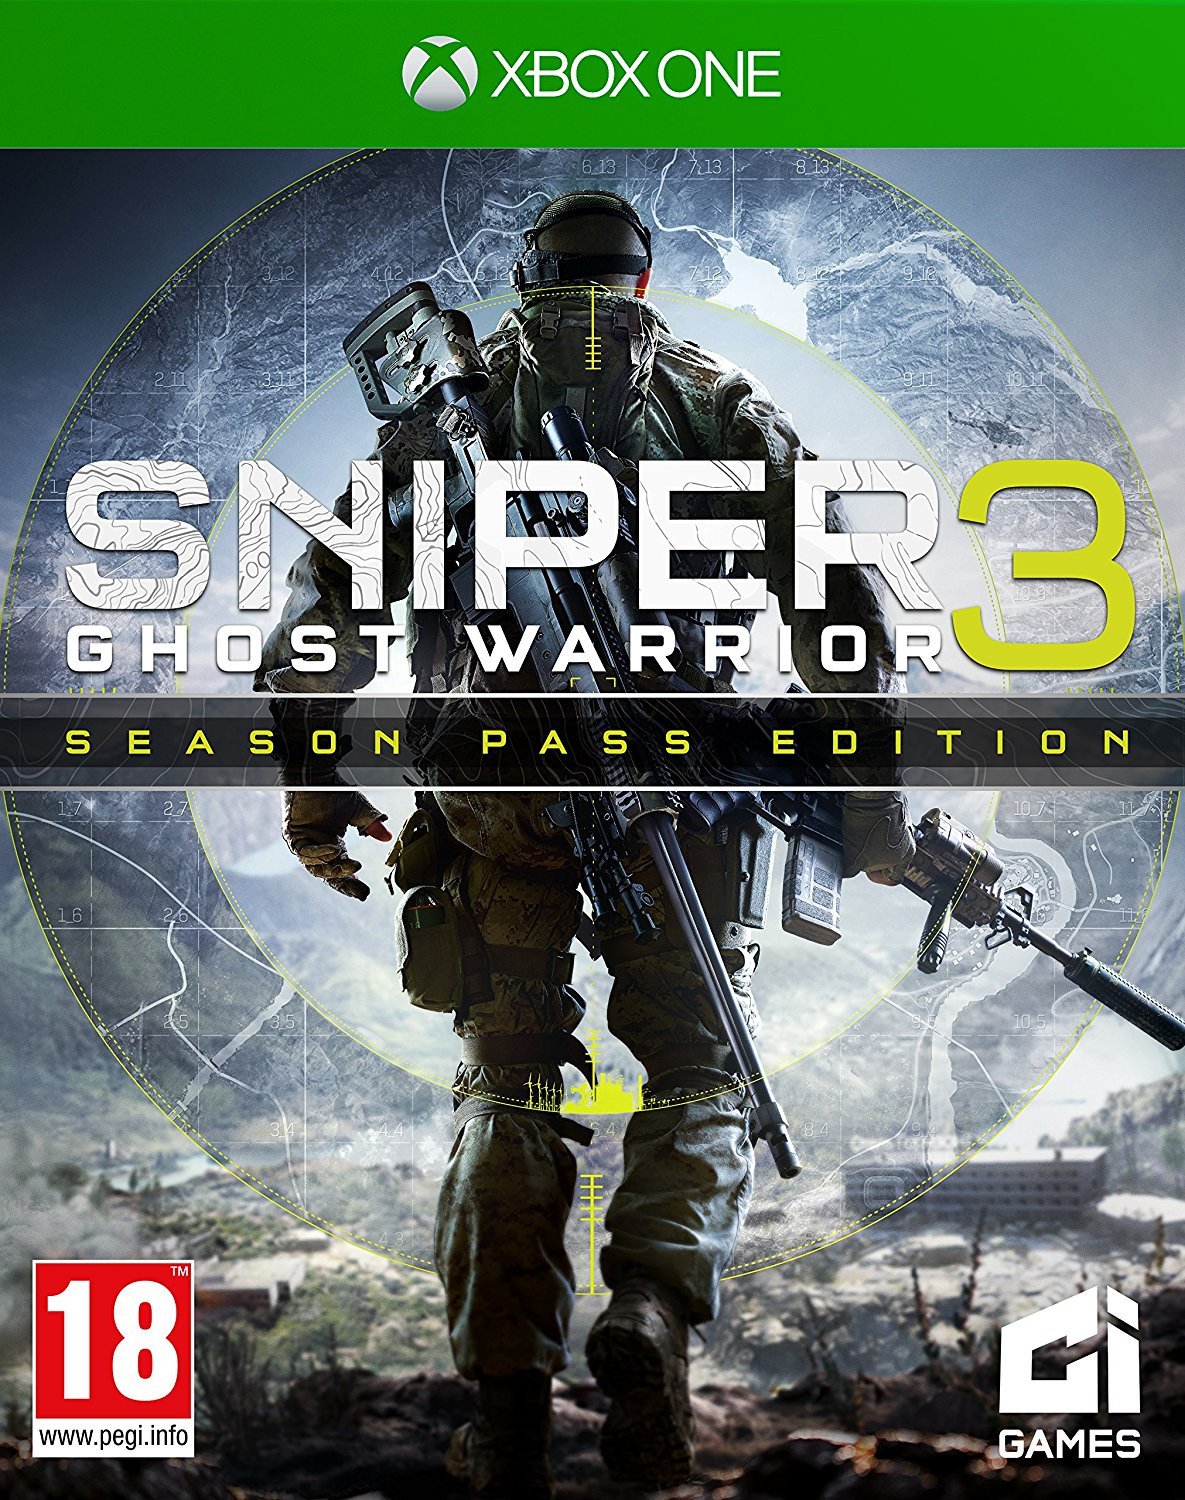 Sniper: Ghost Warrior 3 Season Pass Edition (Xbox One) - Offer Games